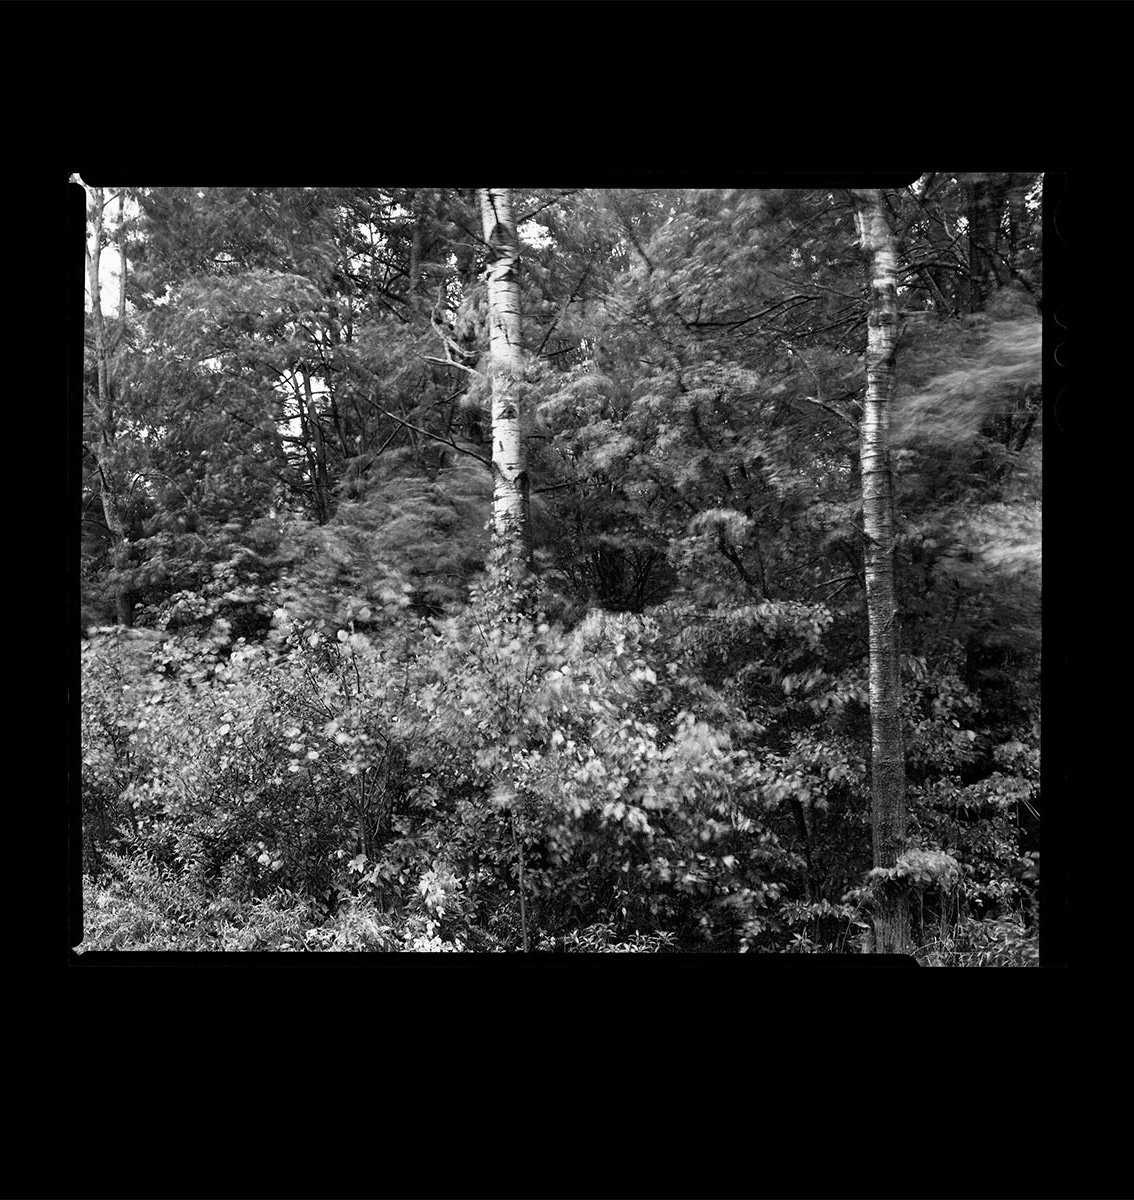 Image from One Year showing trees in black and white